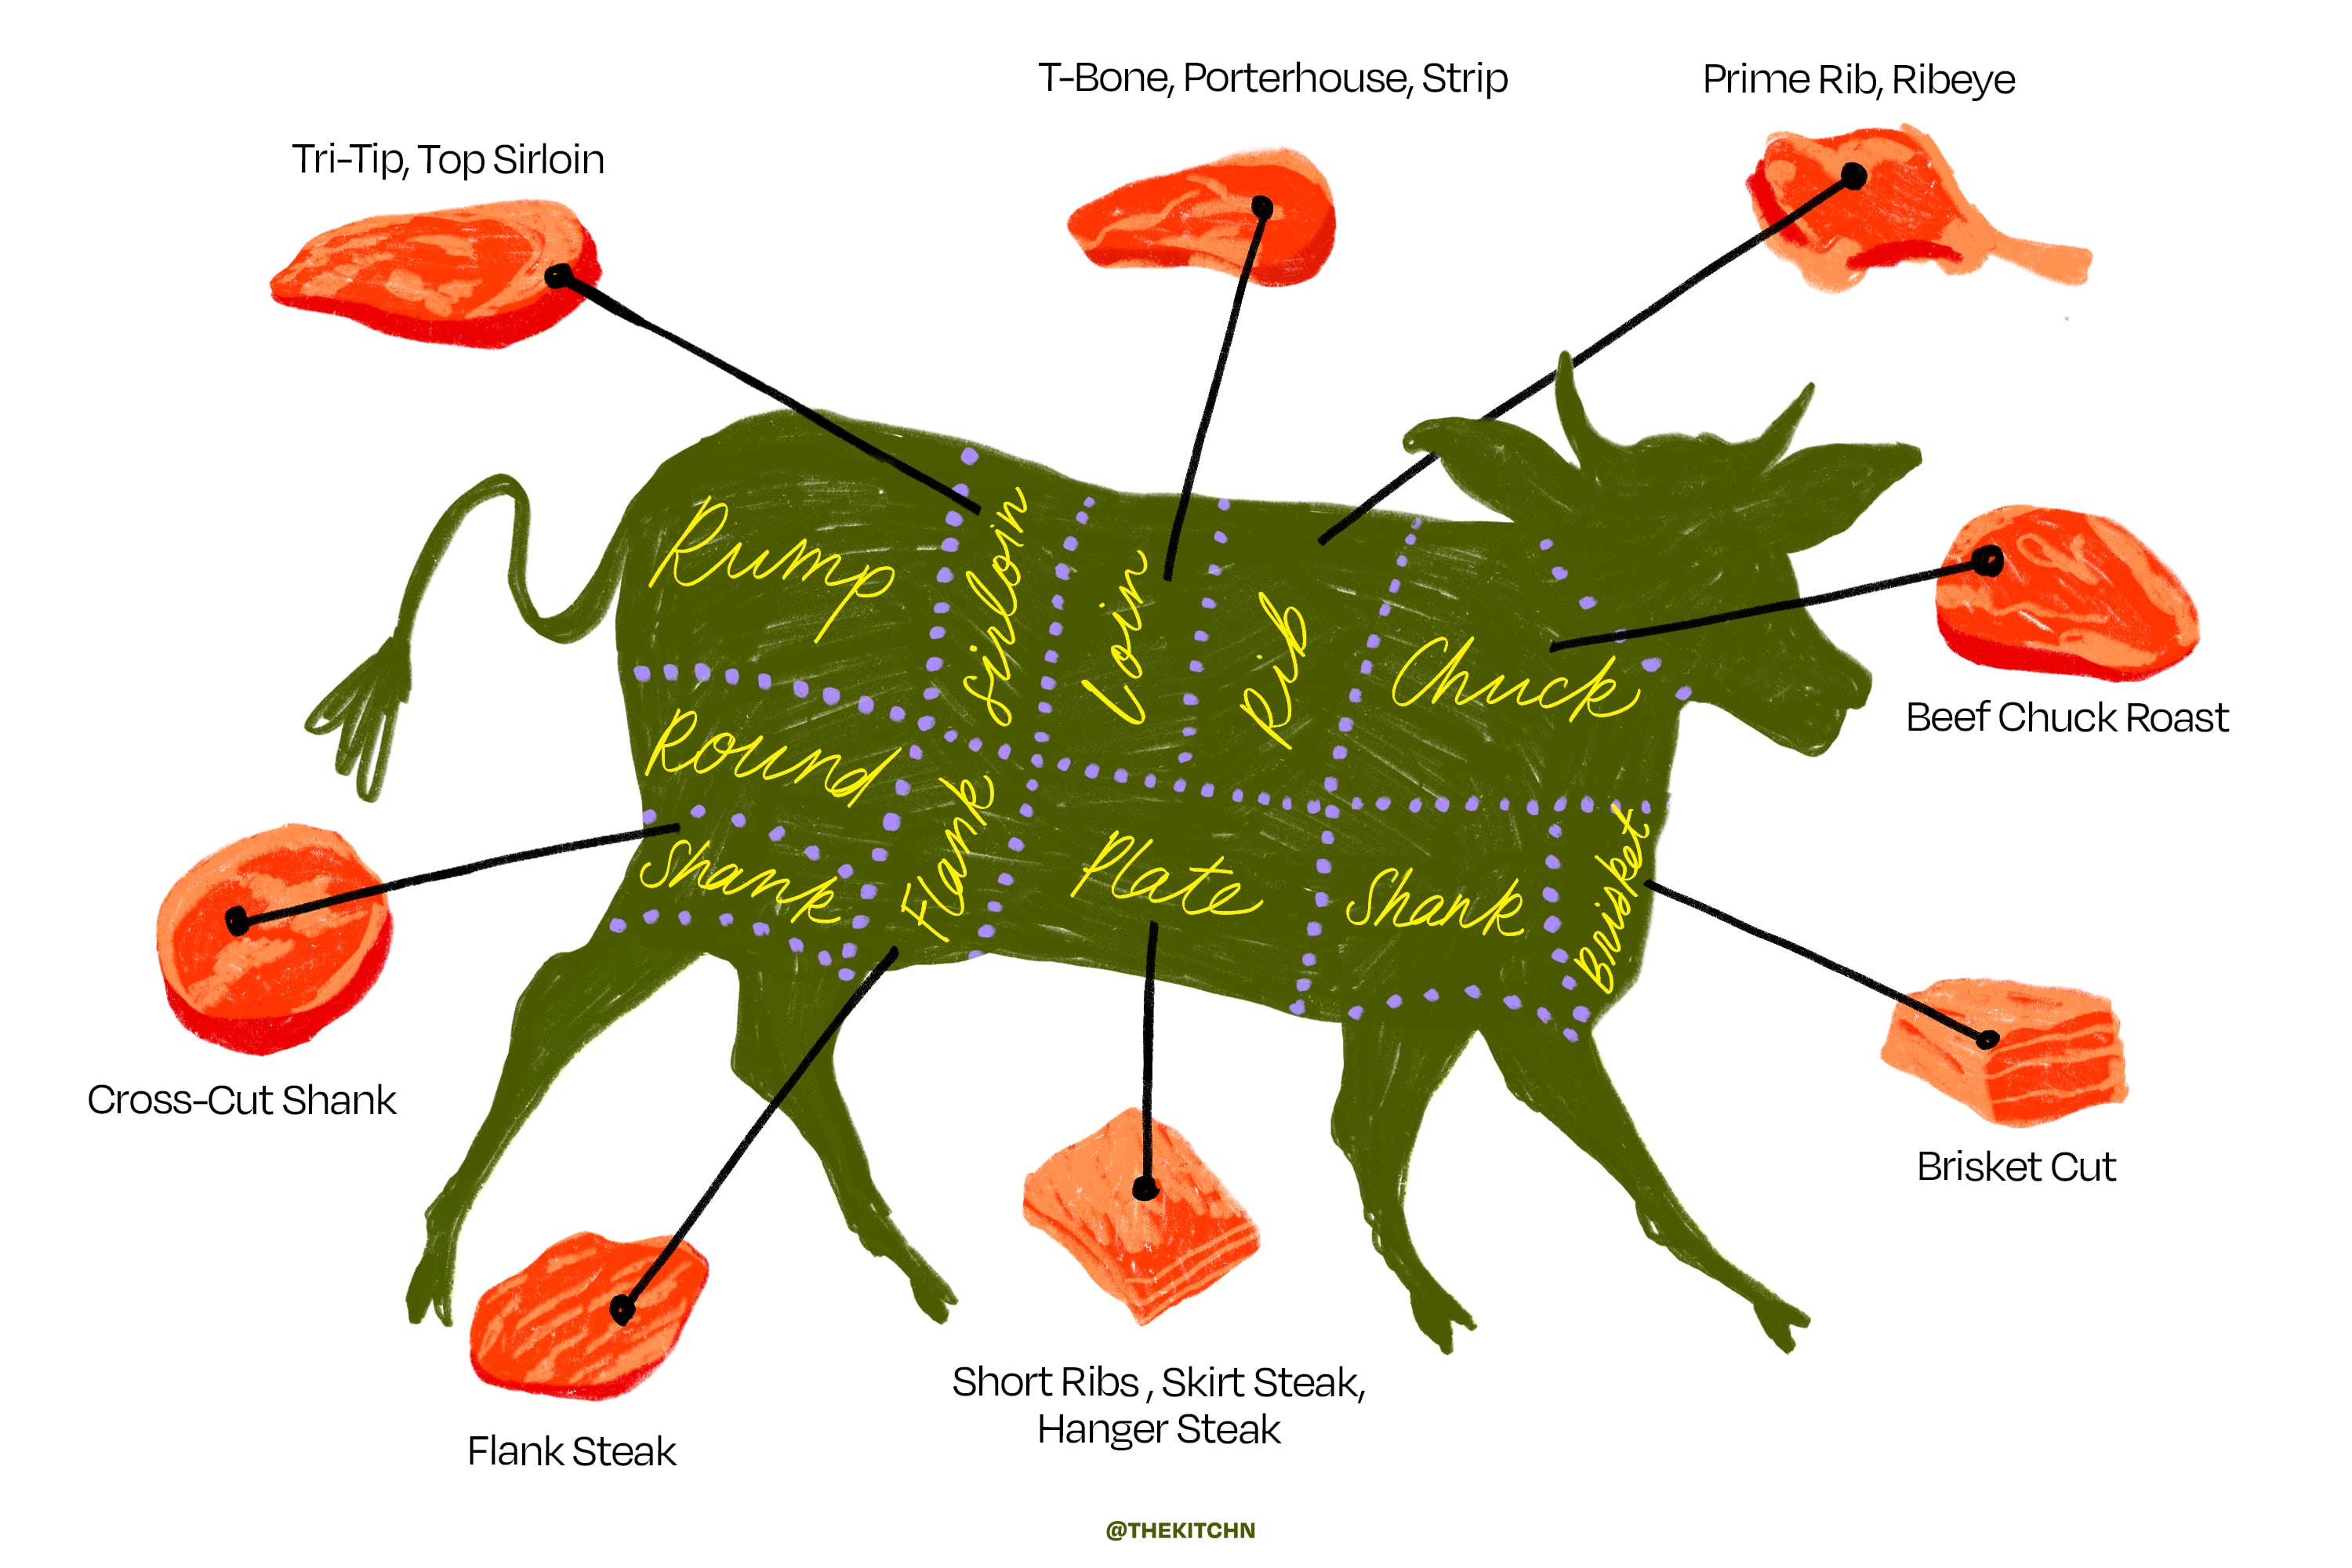 These are the Best Cuts of Beef Explained (Hint: Not the Most